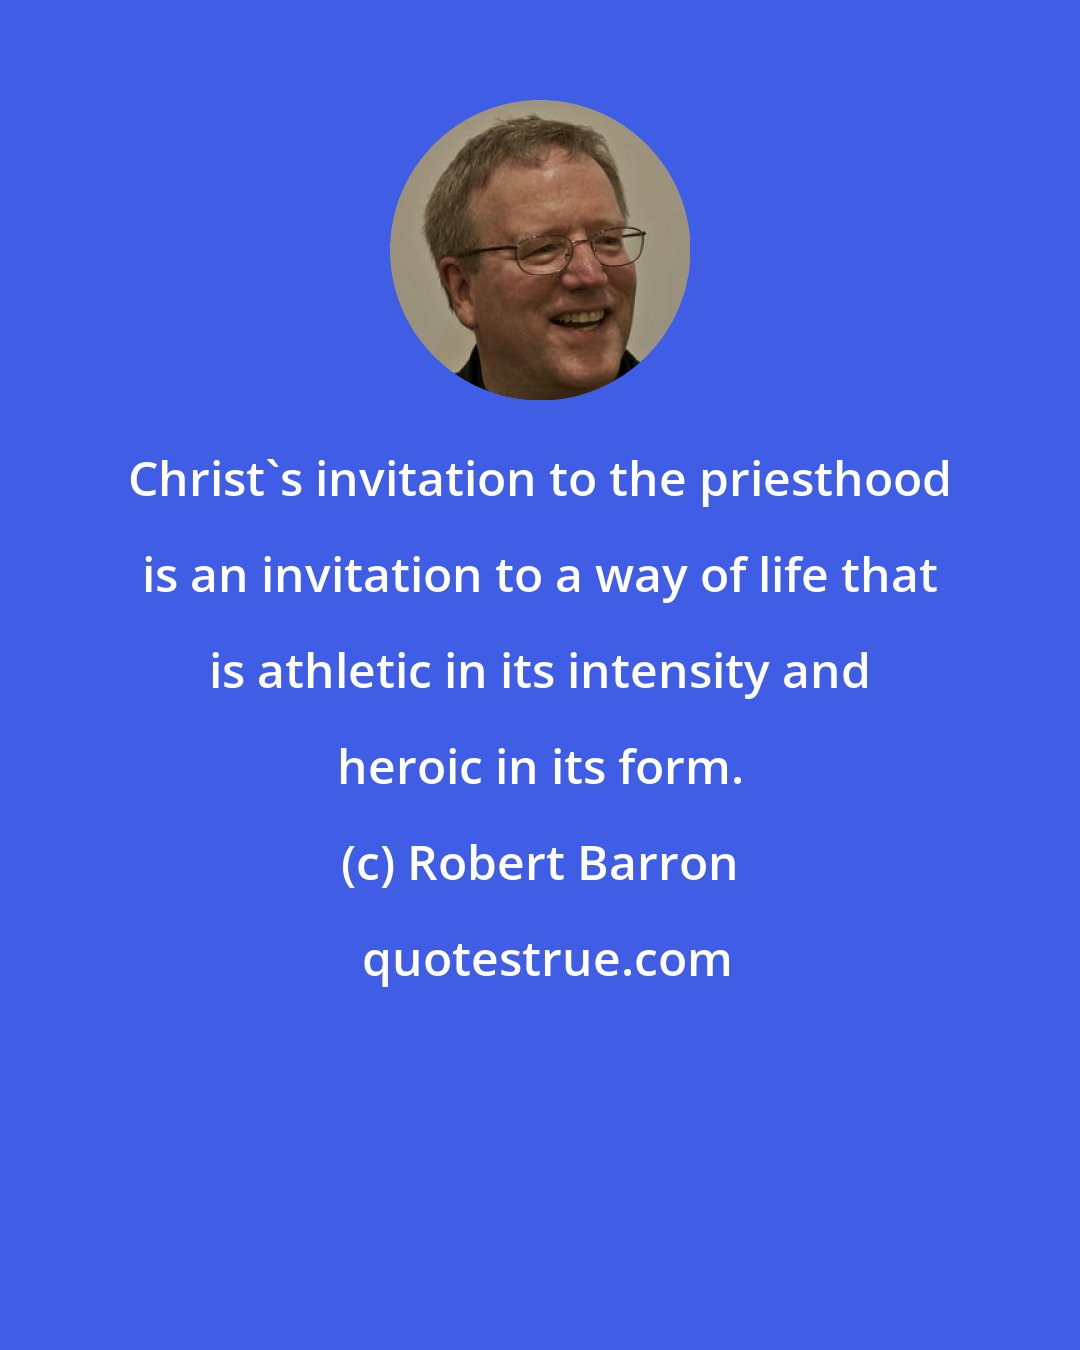 Robert Barron: Christ's invitation to the priesthood is an invitation to a way of life that is athletic in its intensity and heroic in its form.